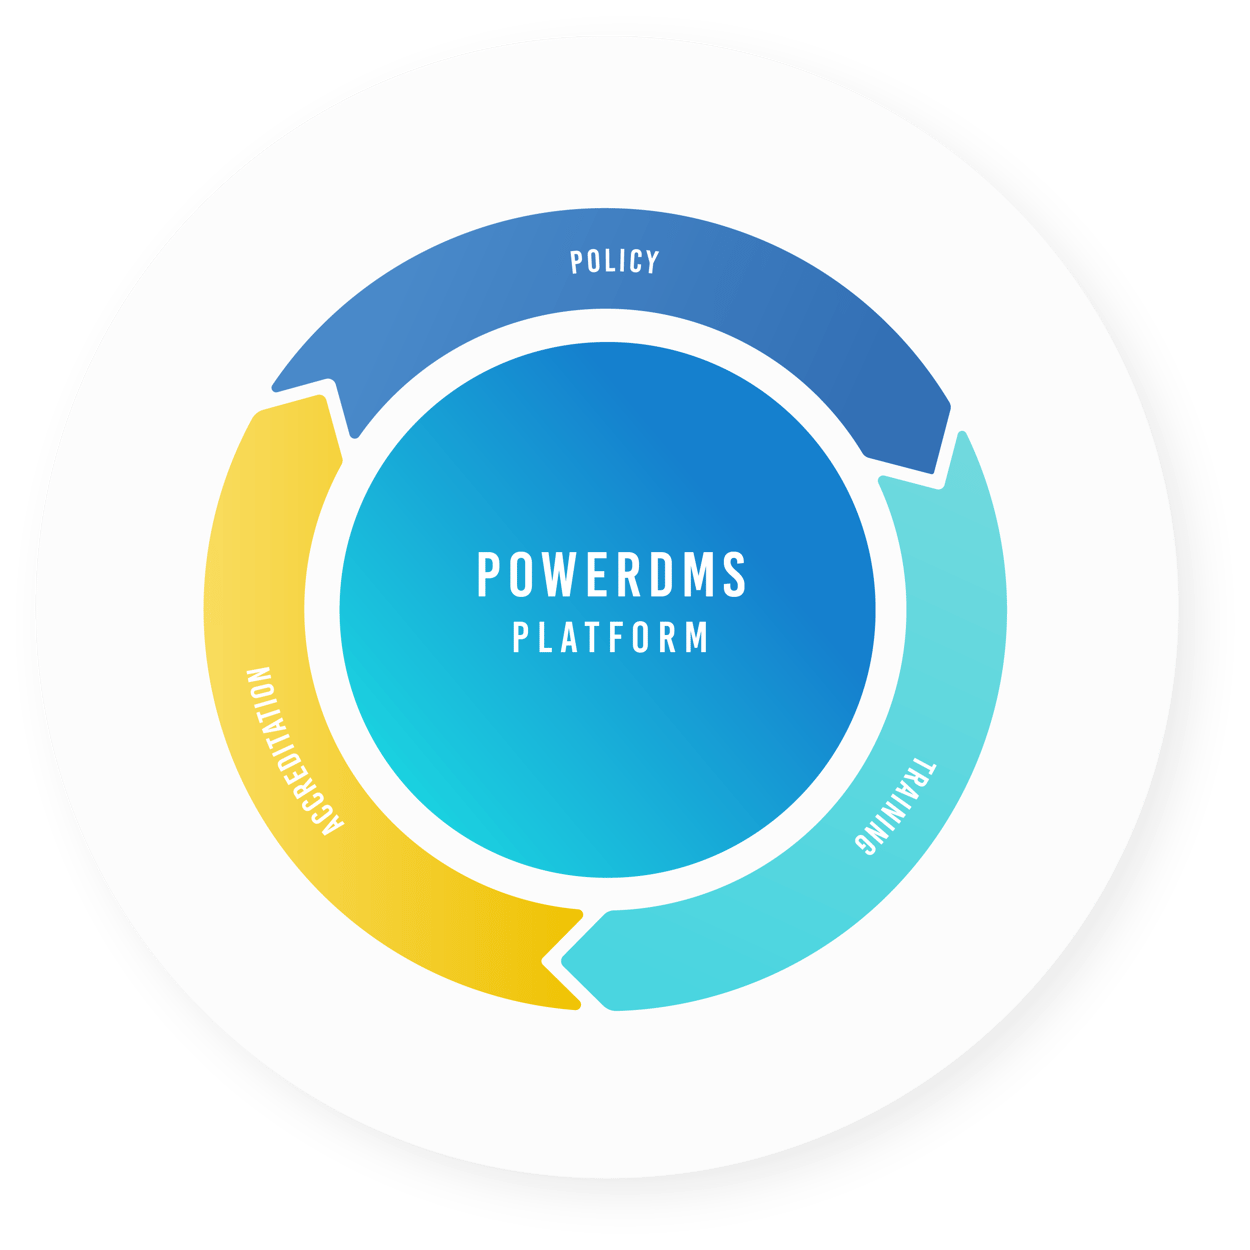 A Complete Overview of PowerDMS